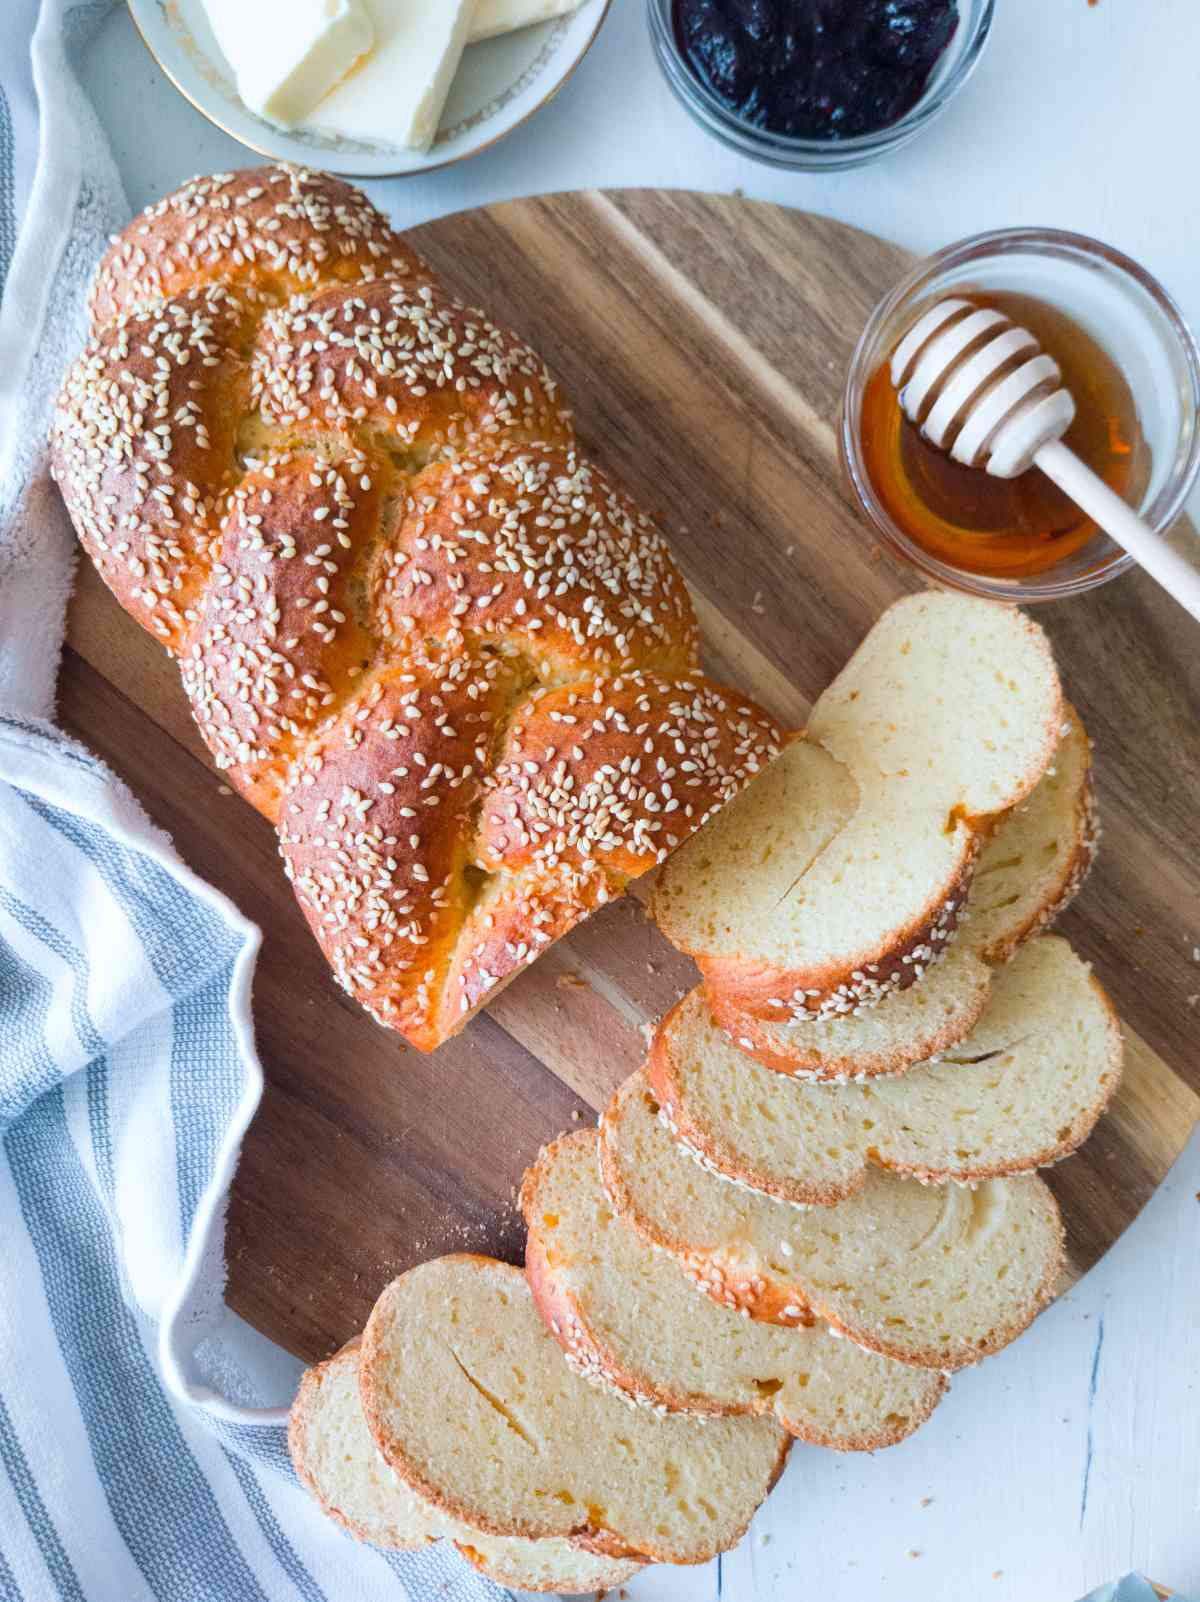 Gluten-free sourdough challah sliced with honey, butter, and jam on the side.